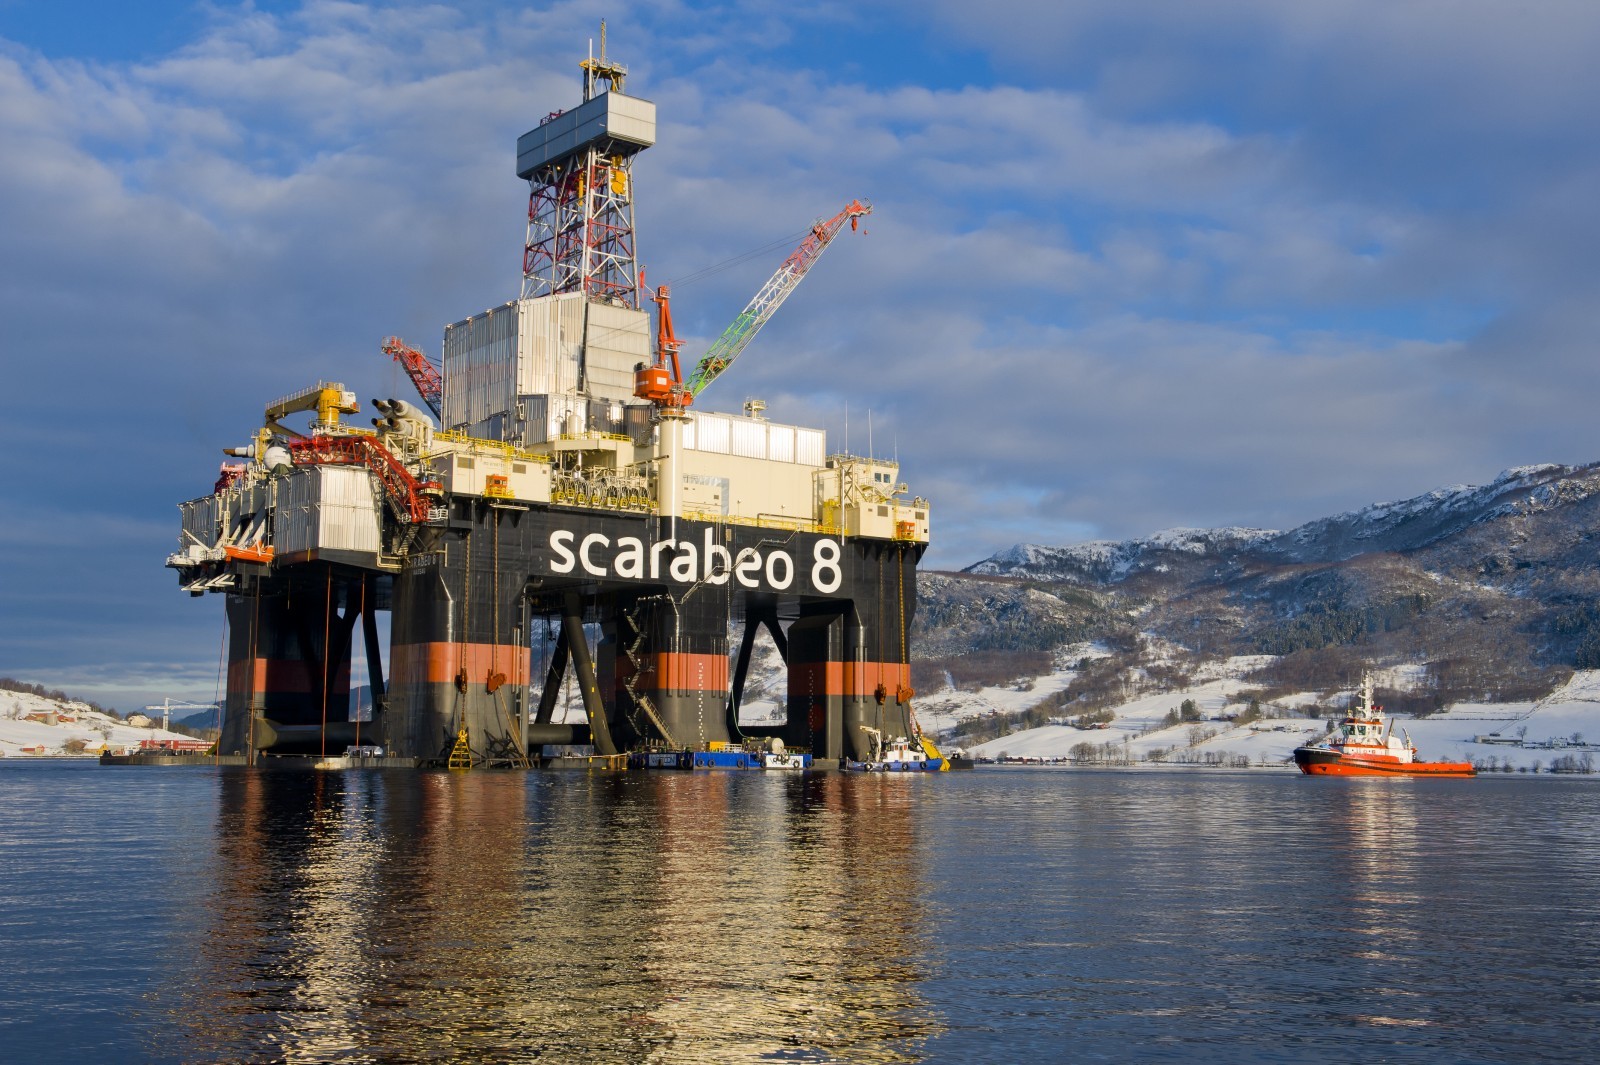 The Scarabeo 8 semi-submersible rig.